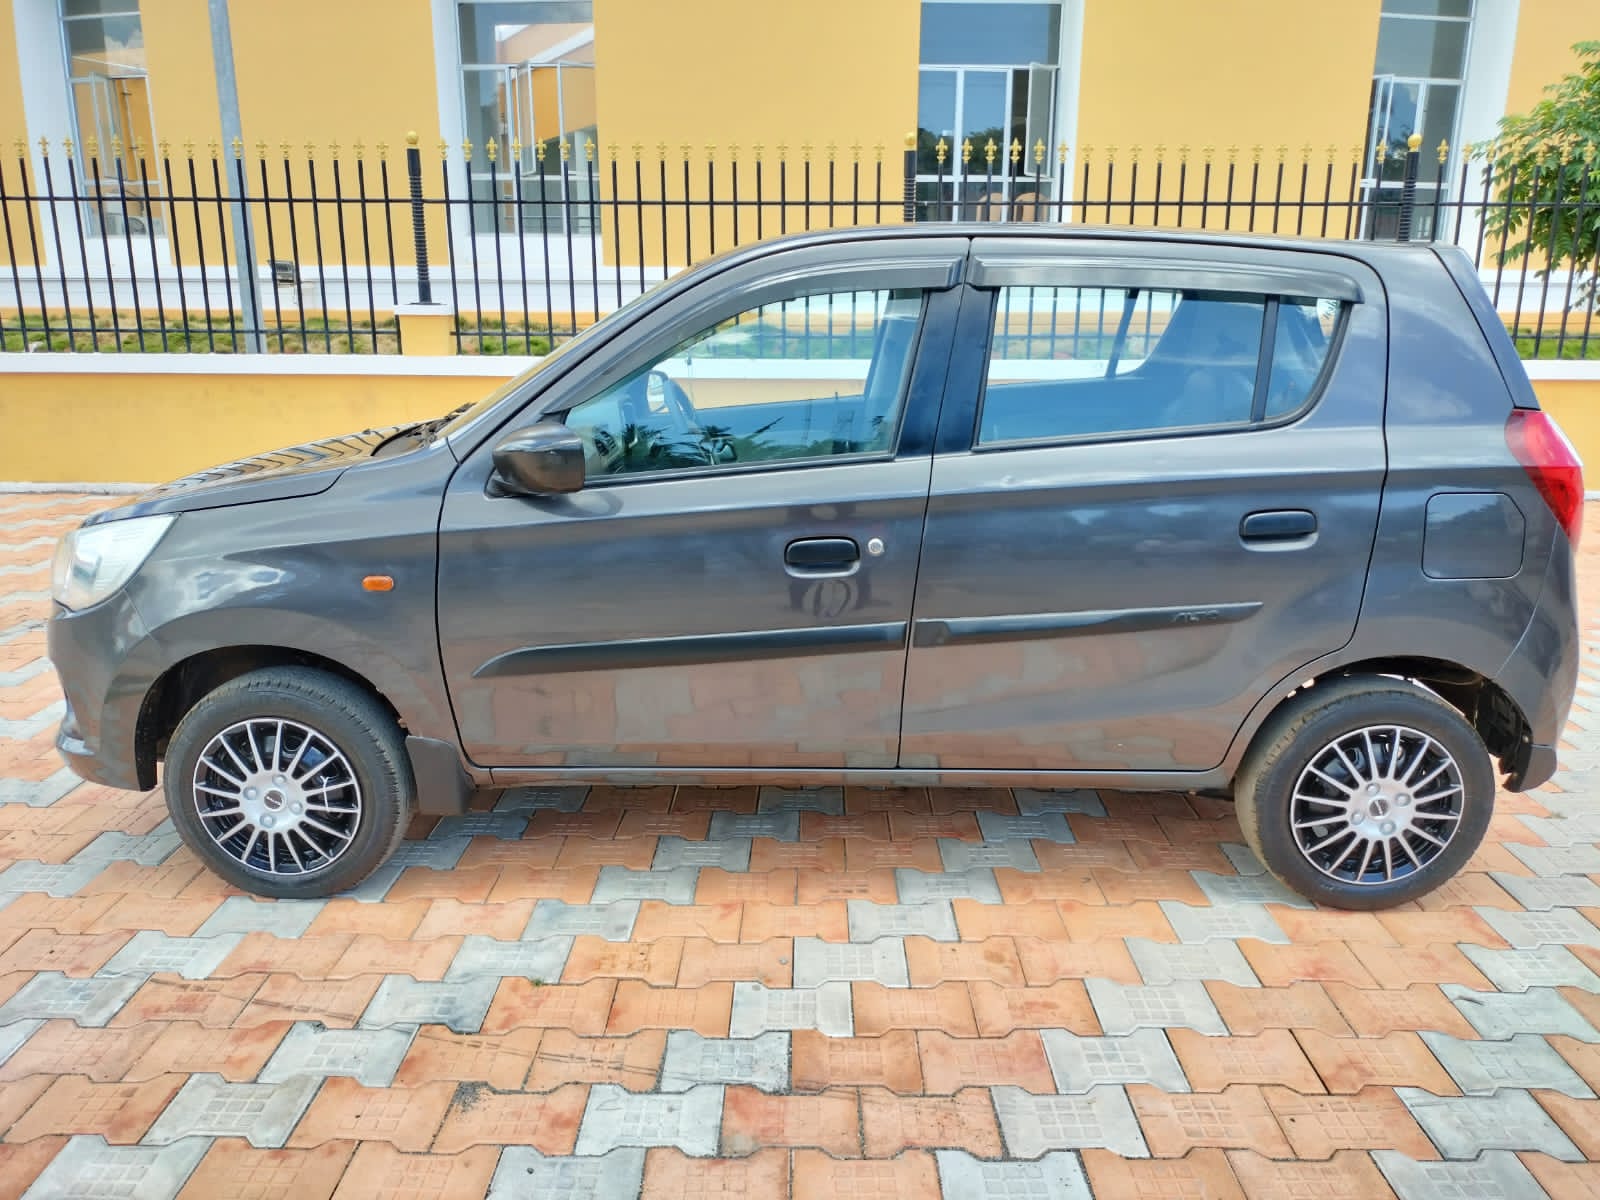 4663-for-sale-Maruthi-Suzuki-Alto-800-Petrol-First-Owner-2016-PY-registered-rs-325000